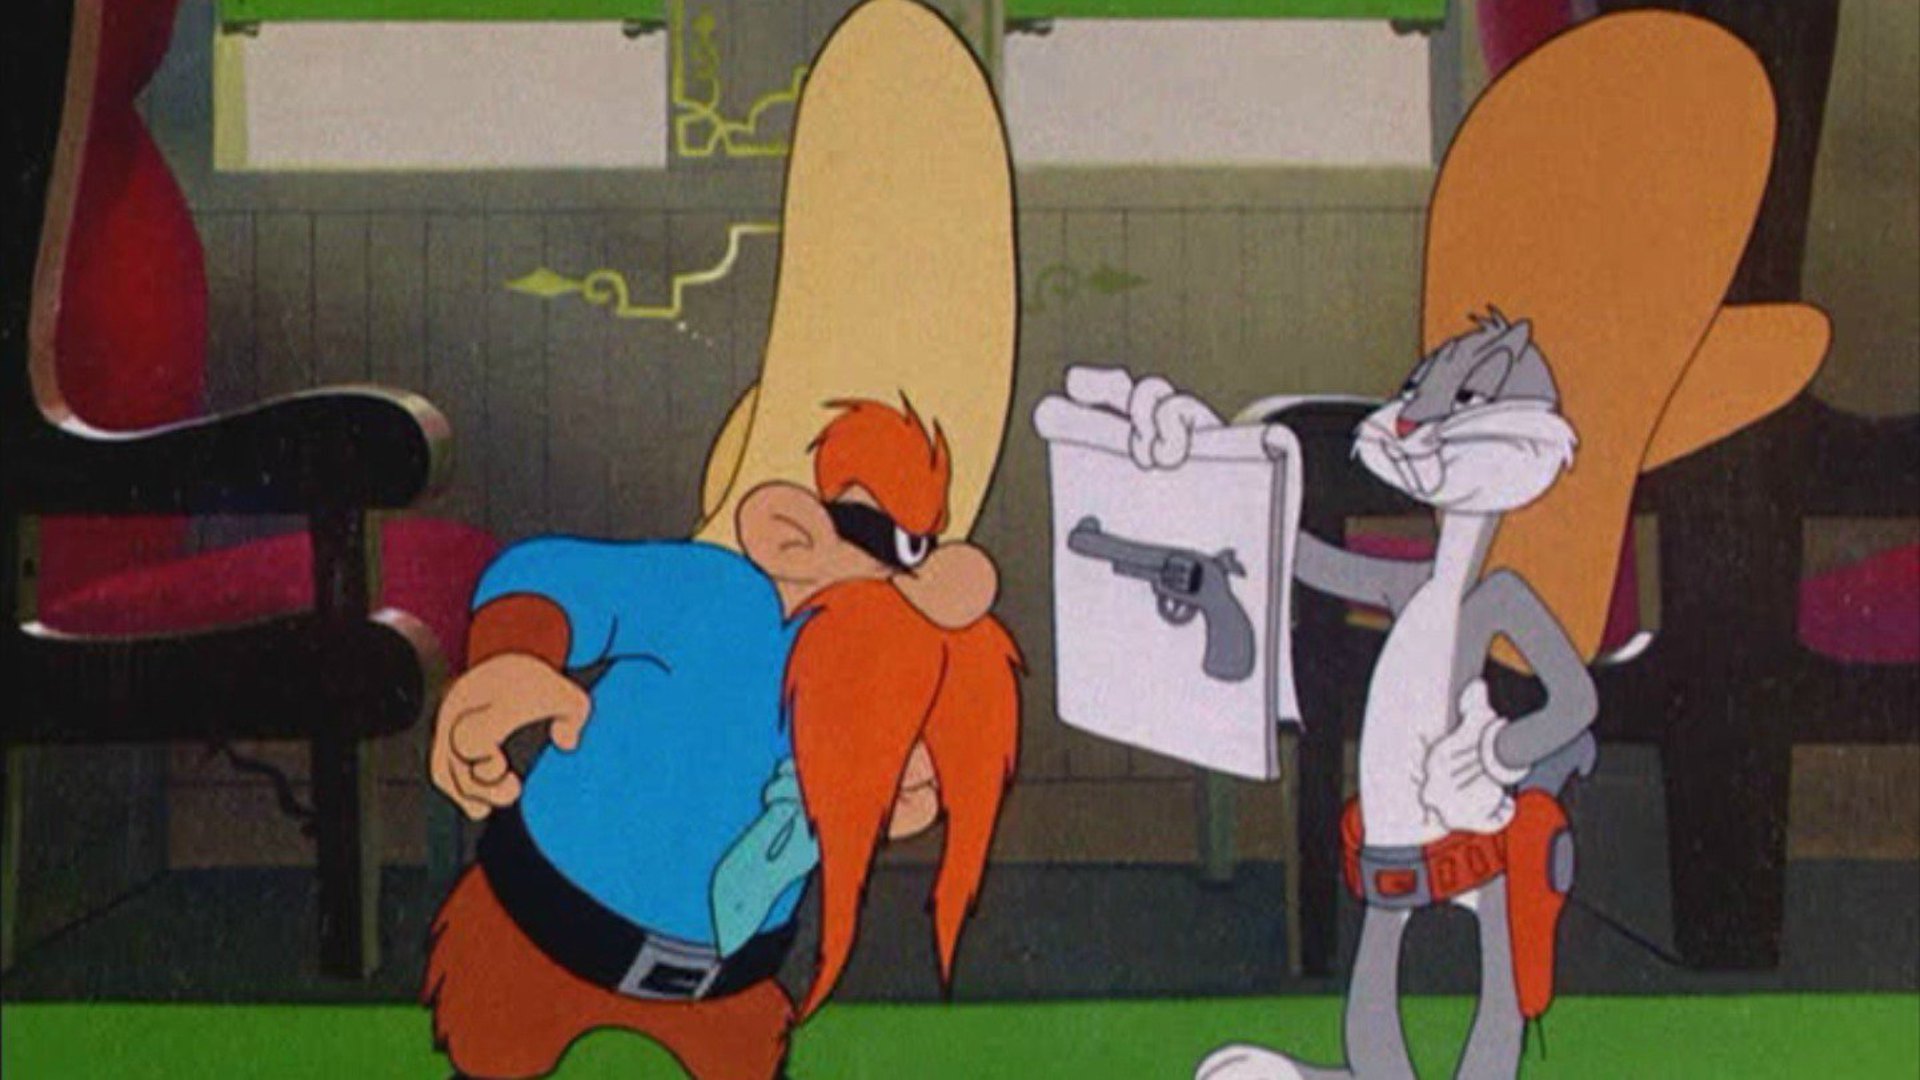 Yosemite Sam is trying to rob the train that Bugs Bunny is riding on, and t...